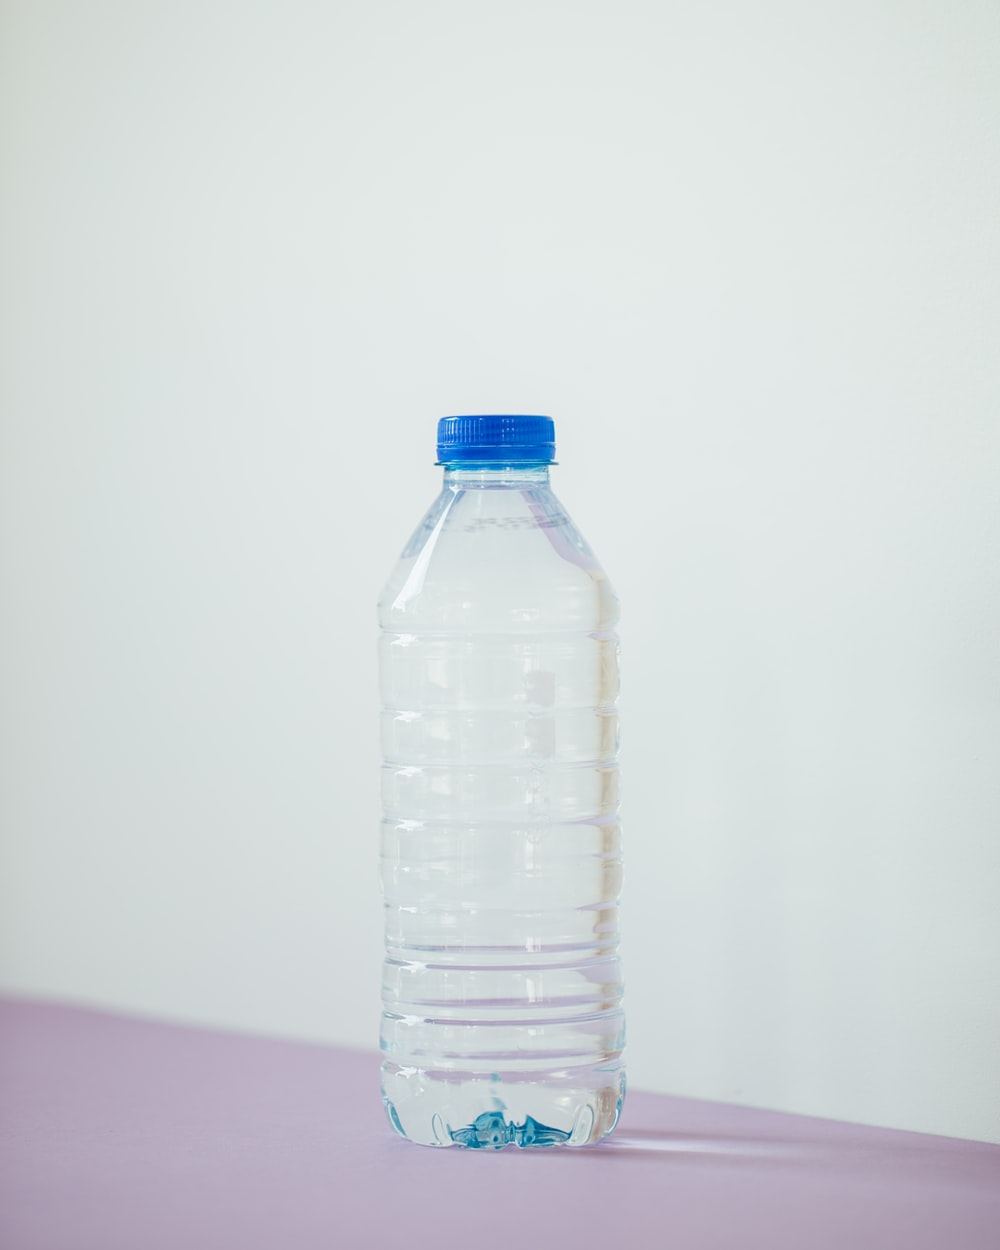 Mineral Water Picture. Download Free Image